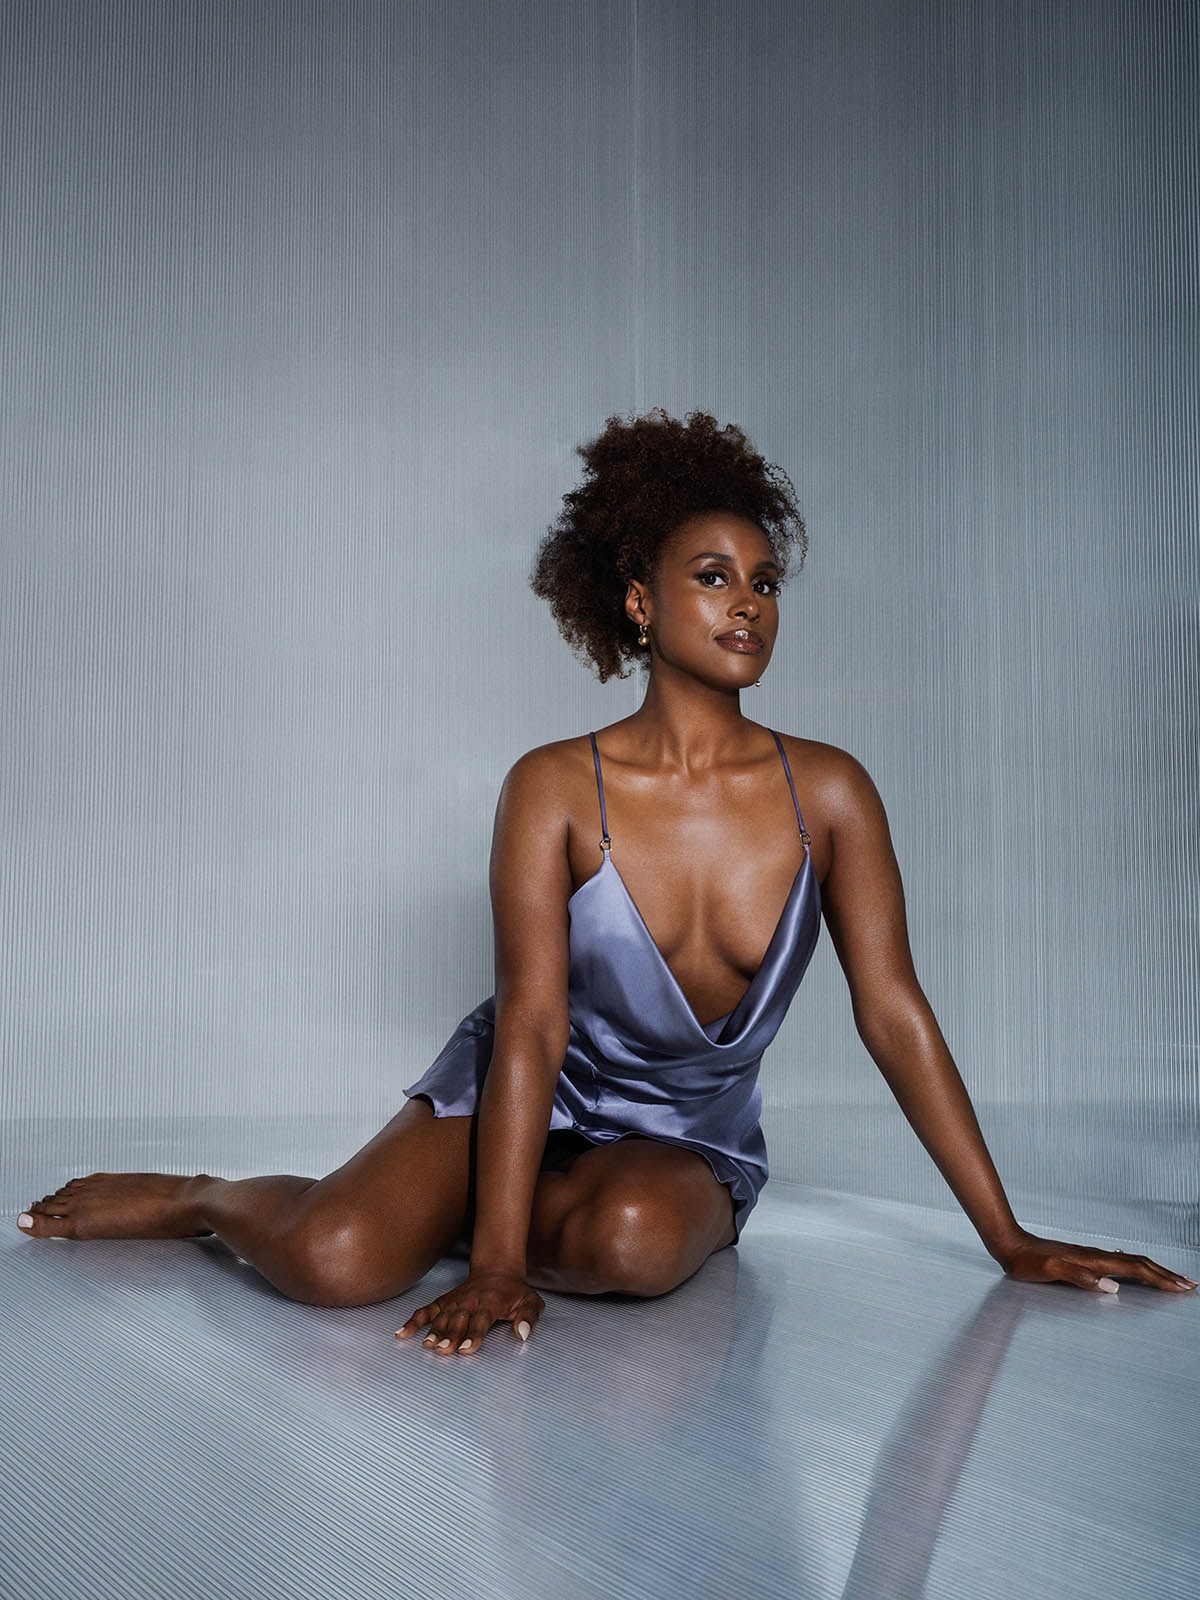 Issa Rae covers Rolling Stone May 2021 by Dana Scruggs